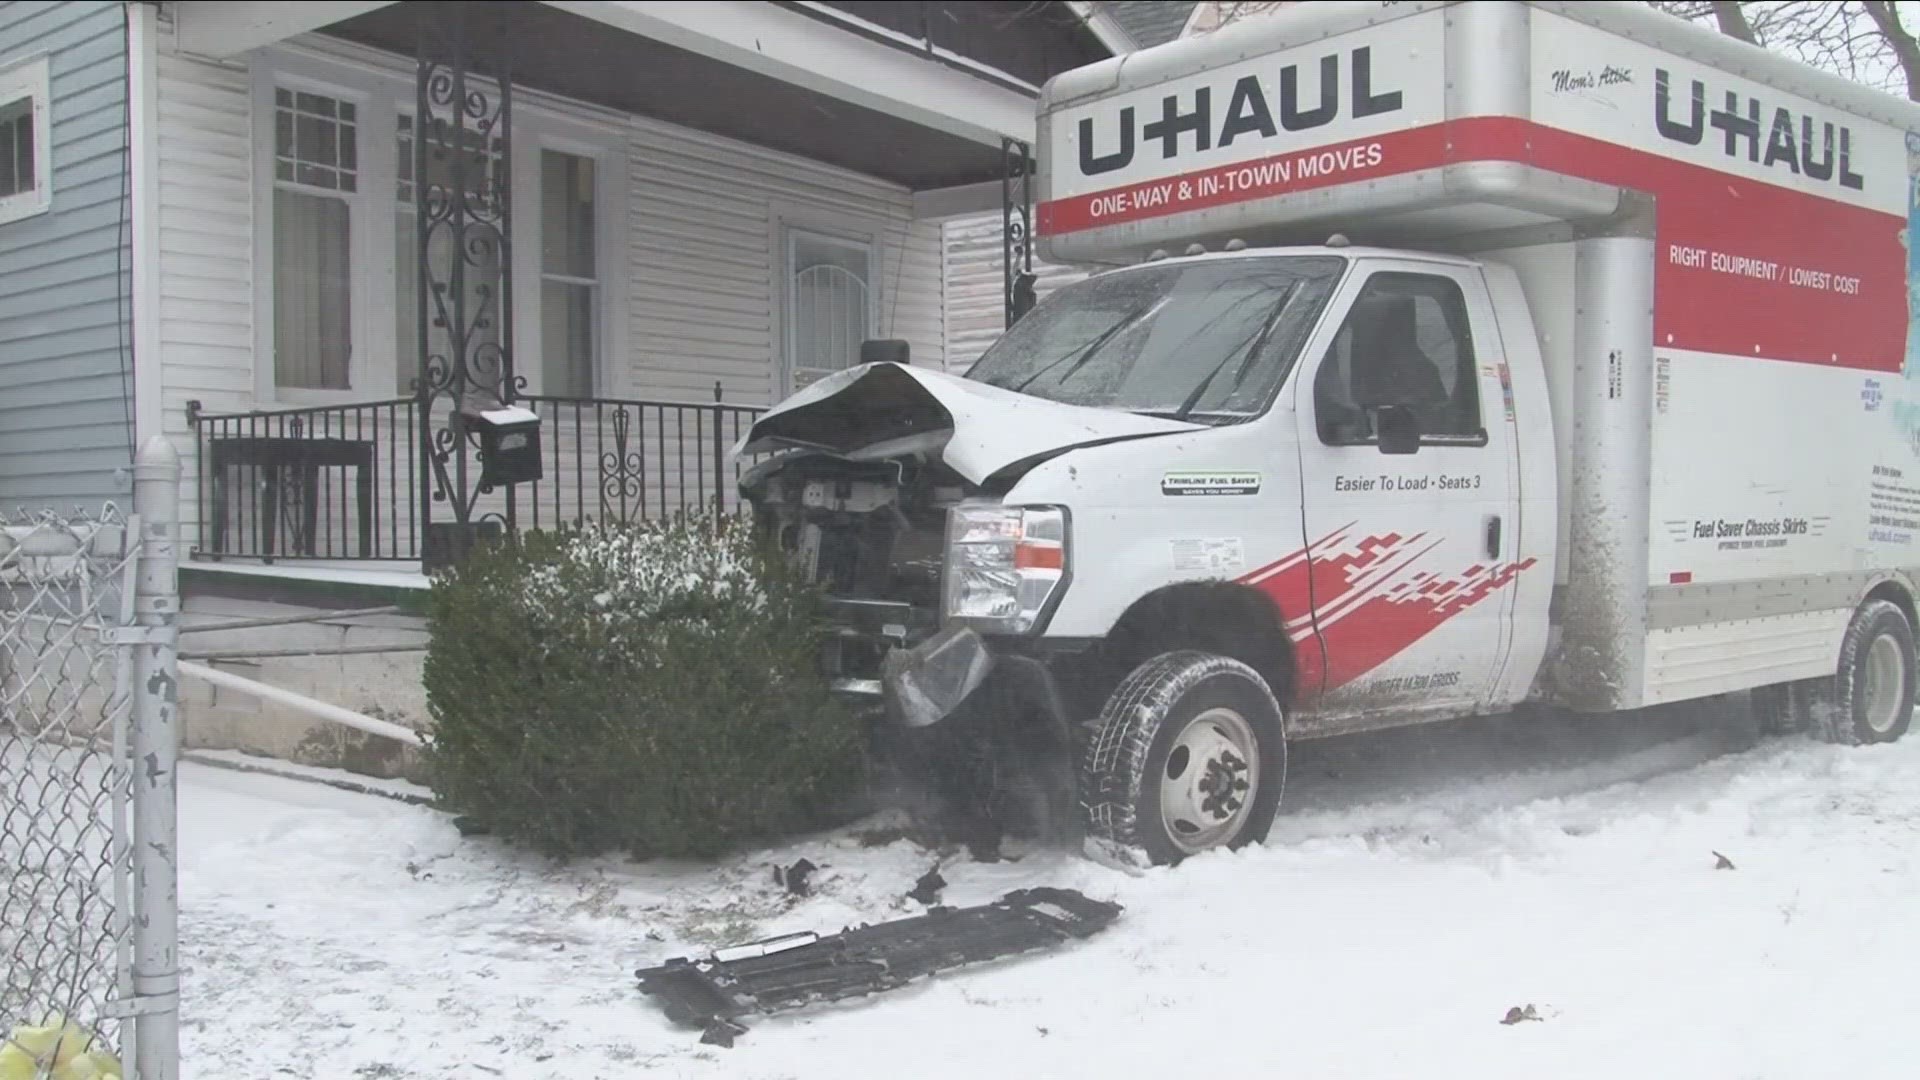 Surveillance video shows the moving truck hitting an SUV before crashing into the year of a Woltz Avenue home.